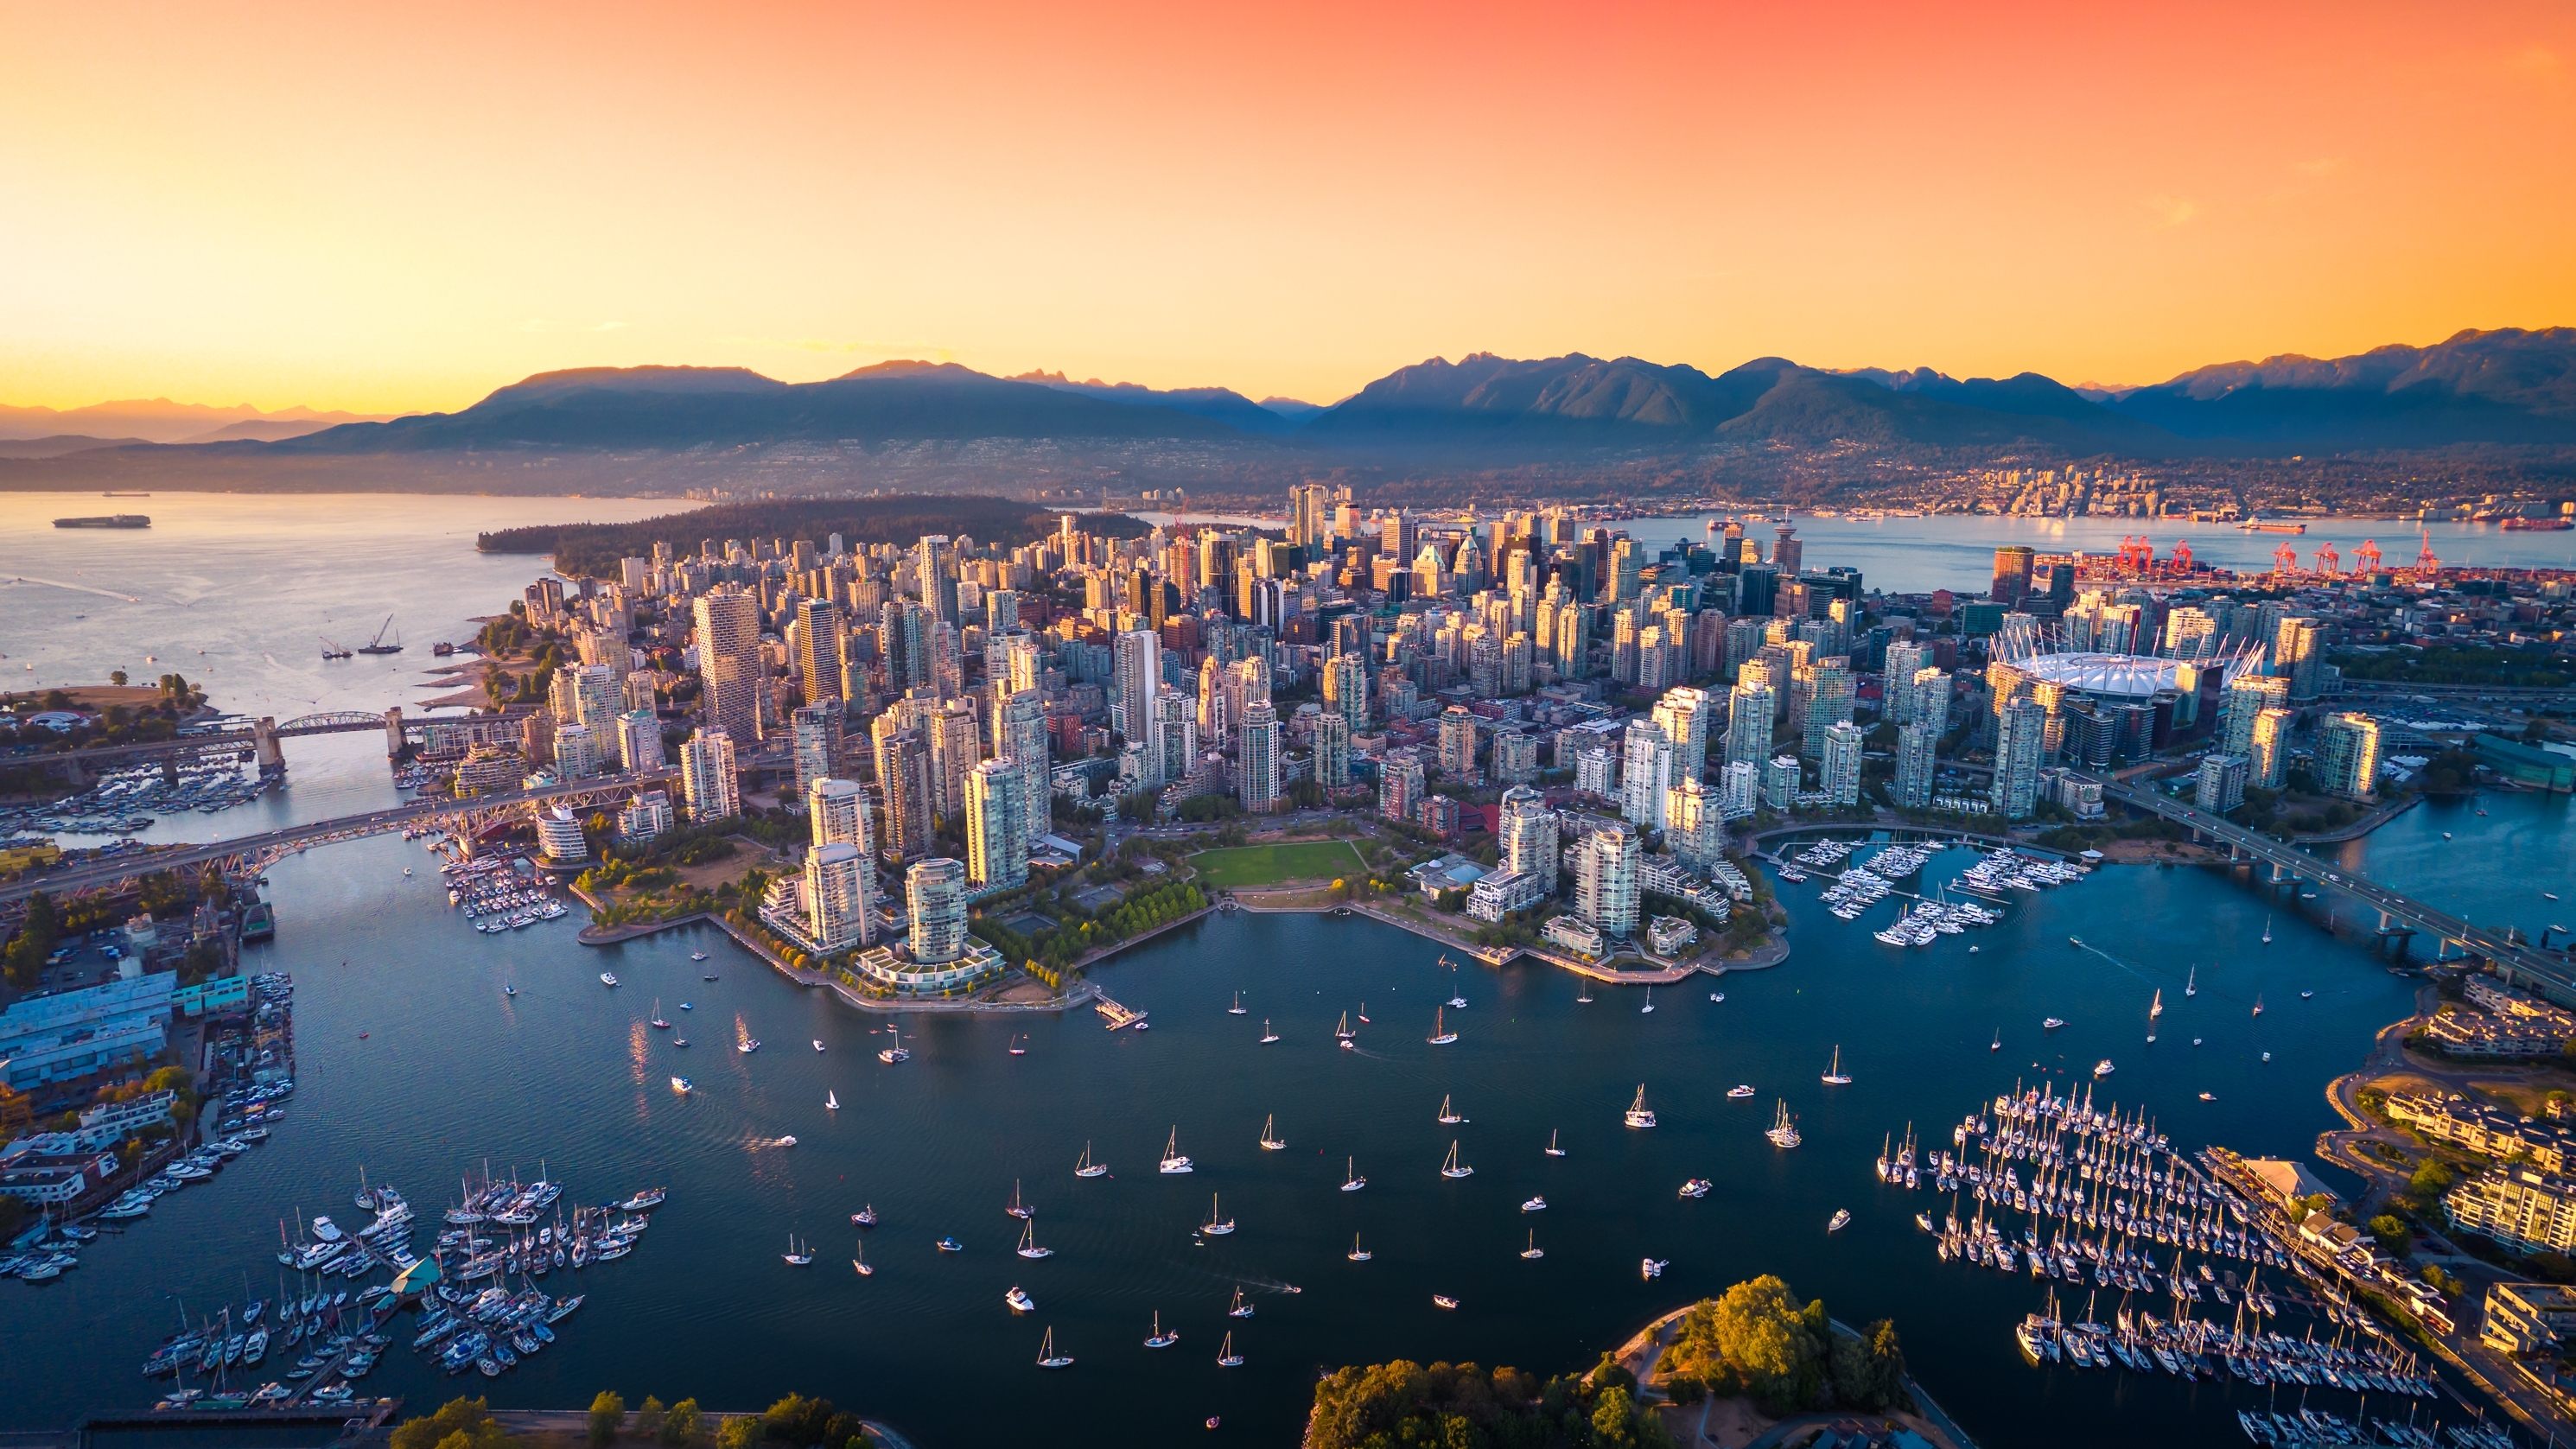 A birds-eye image of Vancouver. The city sits in the middle of the bay, with mountains visible in the background. The photo appears to be taken at sunset.